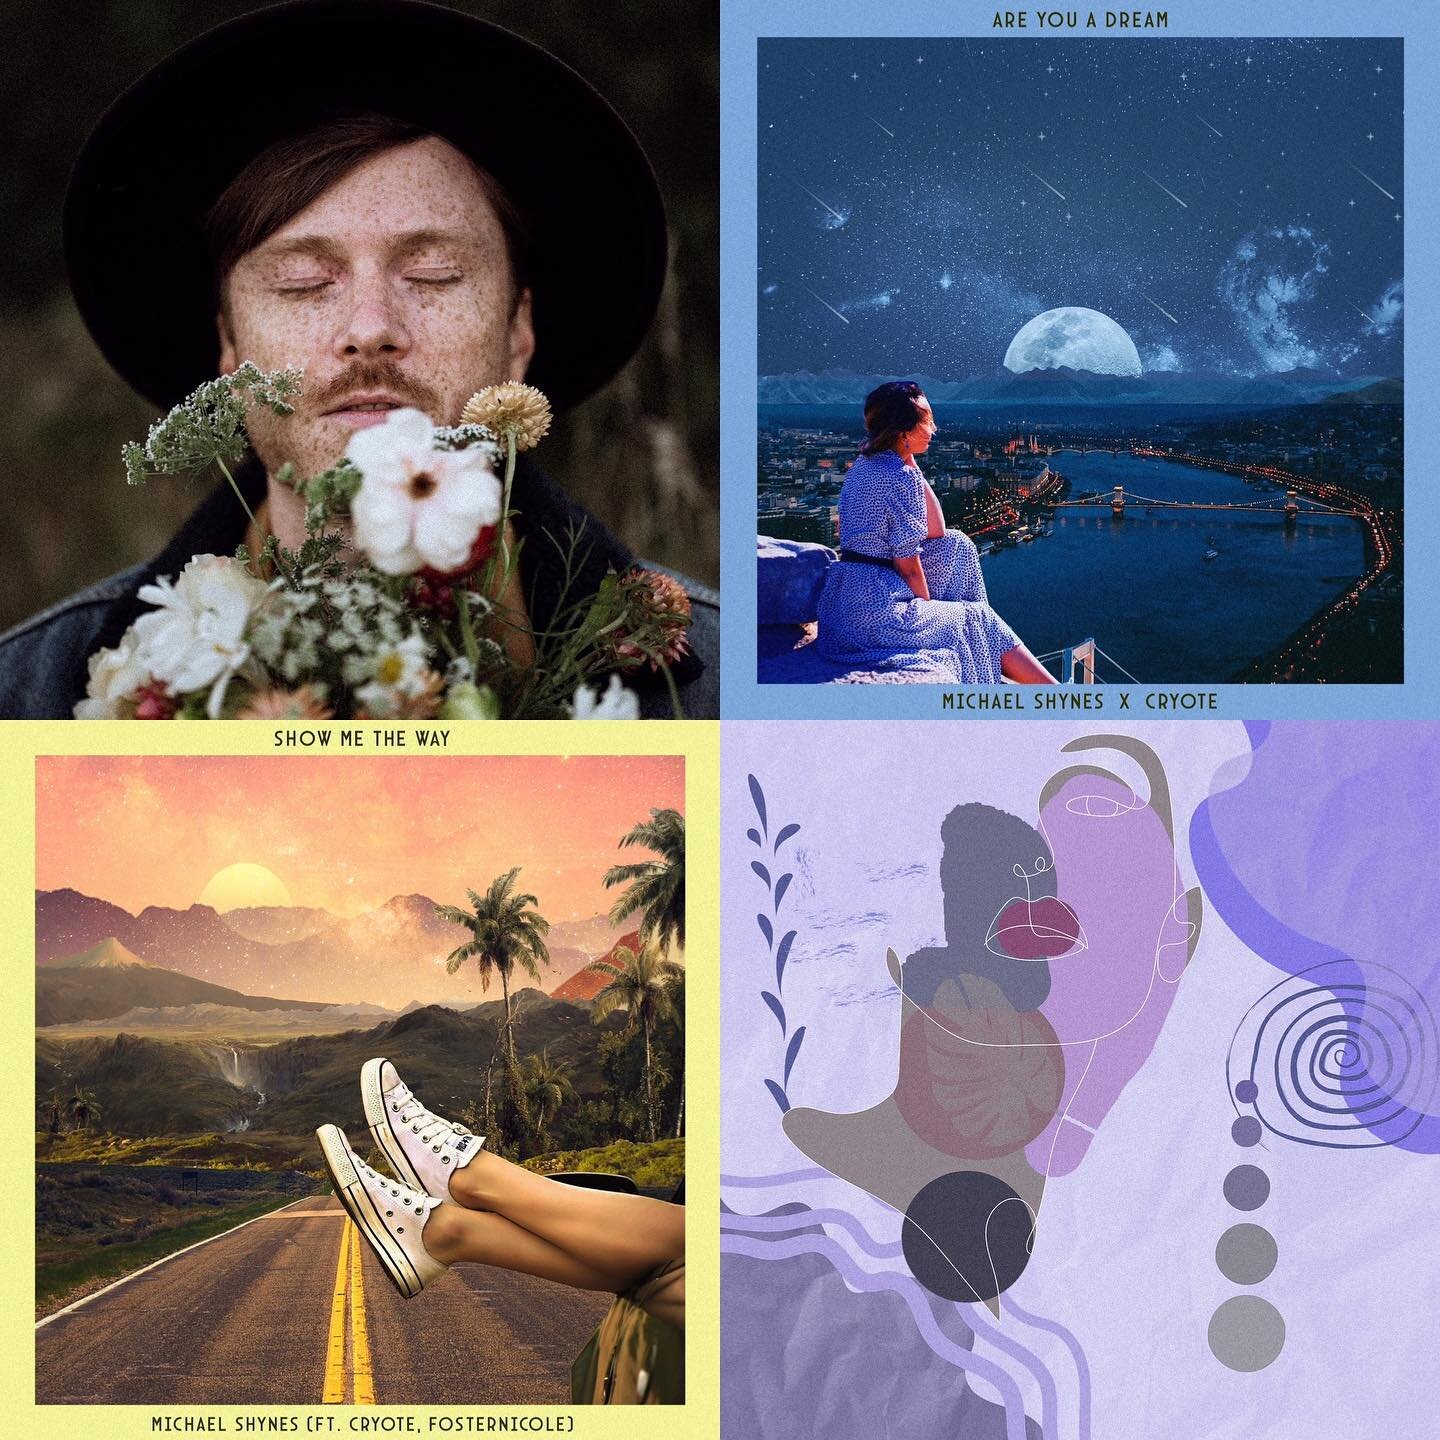 4 big releases coming up this month for me. The first @cryotemusic single installment for my upcoming album and the debut release for my new Lofi project @stargardenermusic. Both songs can be pre-saved via their respective profiles.

I also have two 